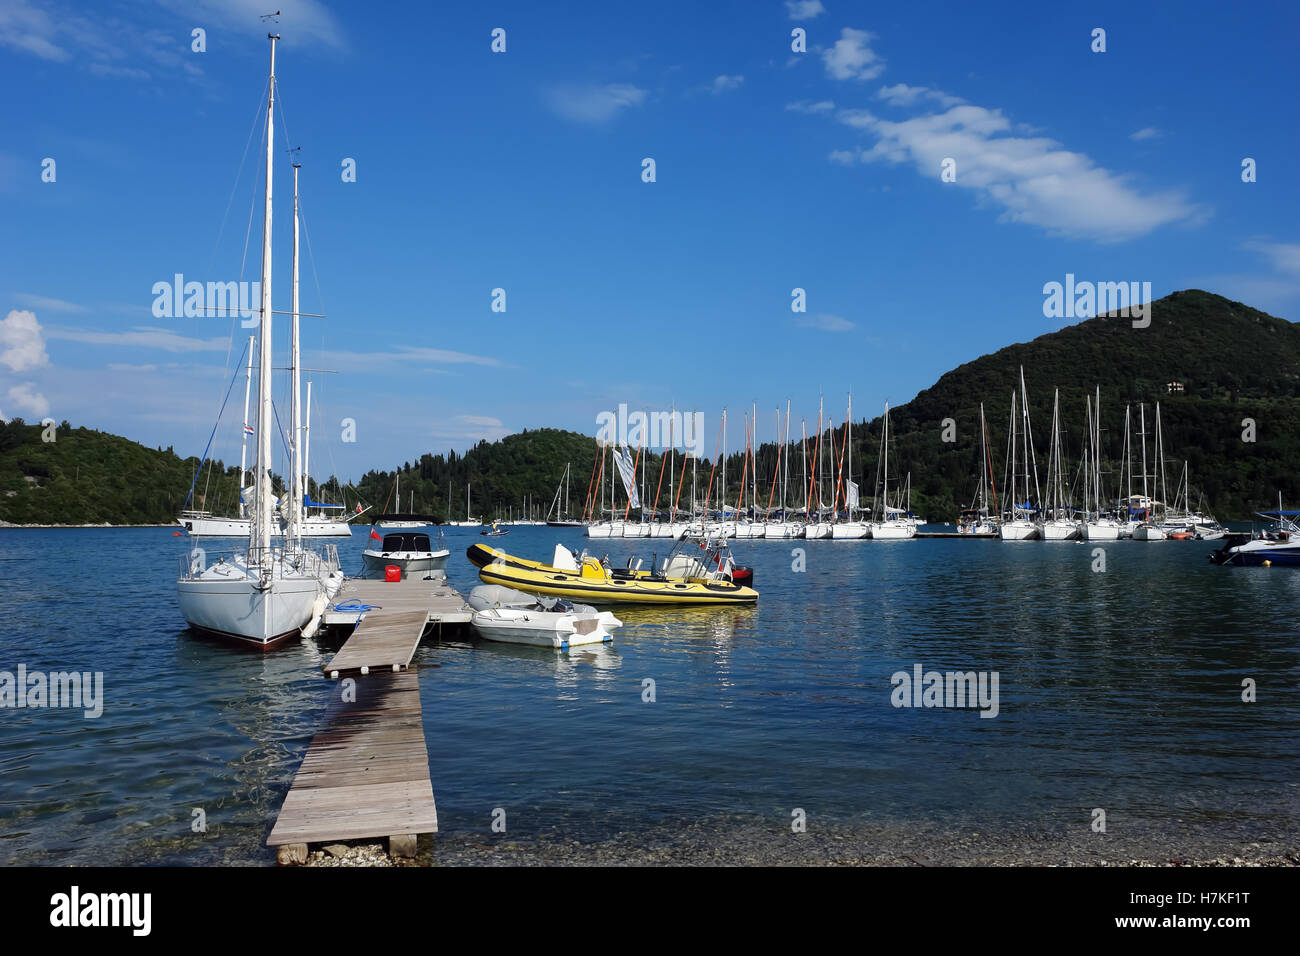 Nidri, GREECE, May 11, 2013: Landscape with blue harbour, green coast, mountains and yachts in Ionian sea, Greece. Stock Photo